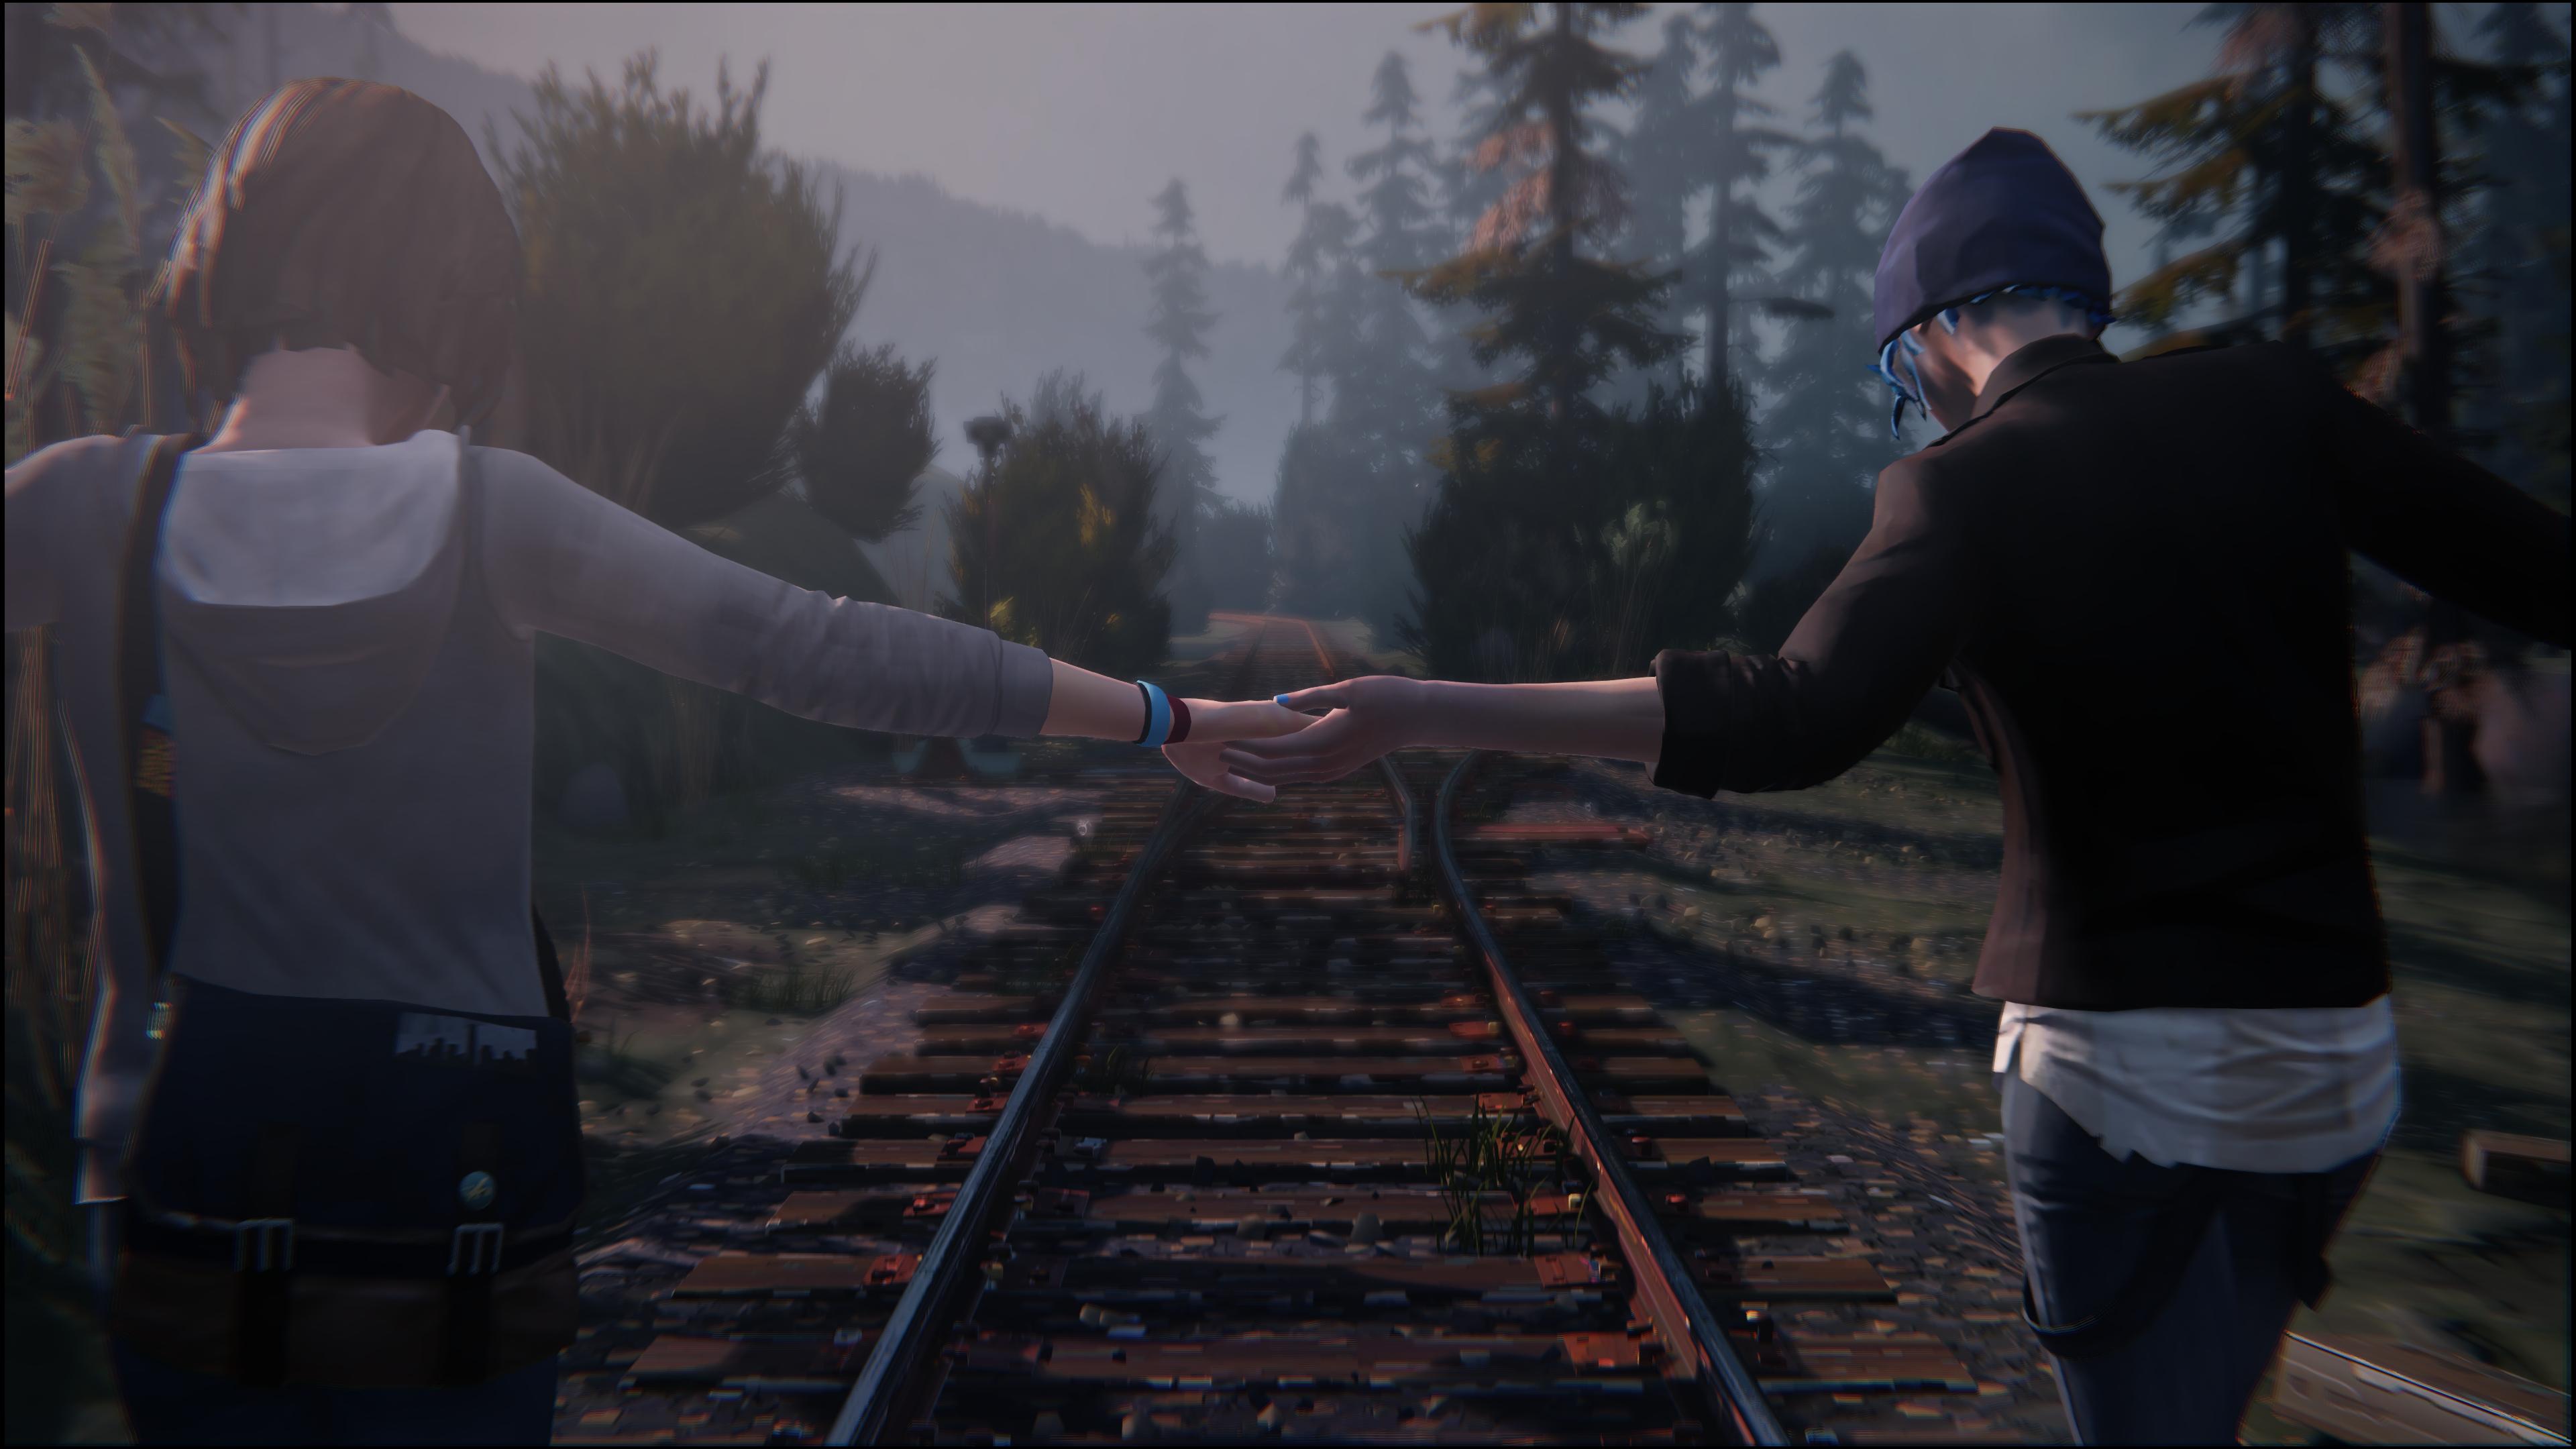 Life Is Strange Wallpapers Top Free Life Is Strange Backgrounds Images, Photos, Reviews